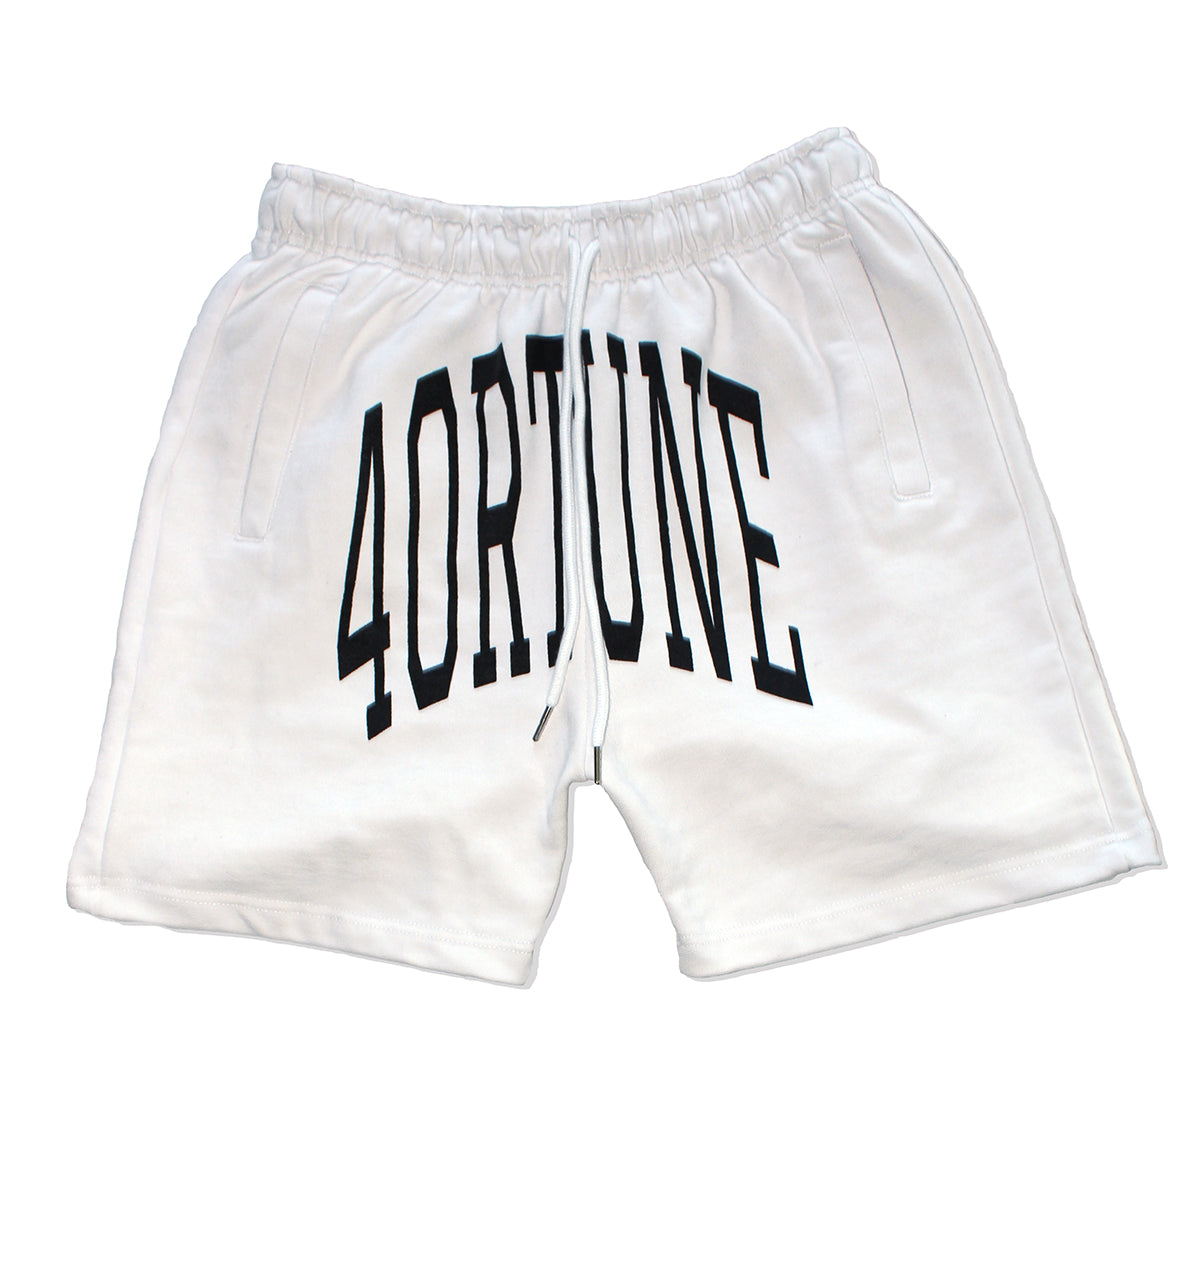 4ortune Arch Shorts